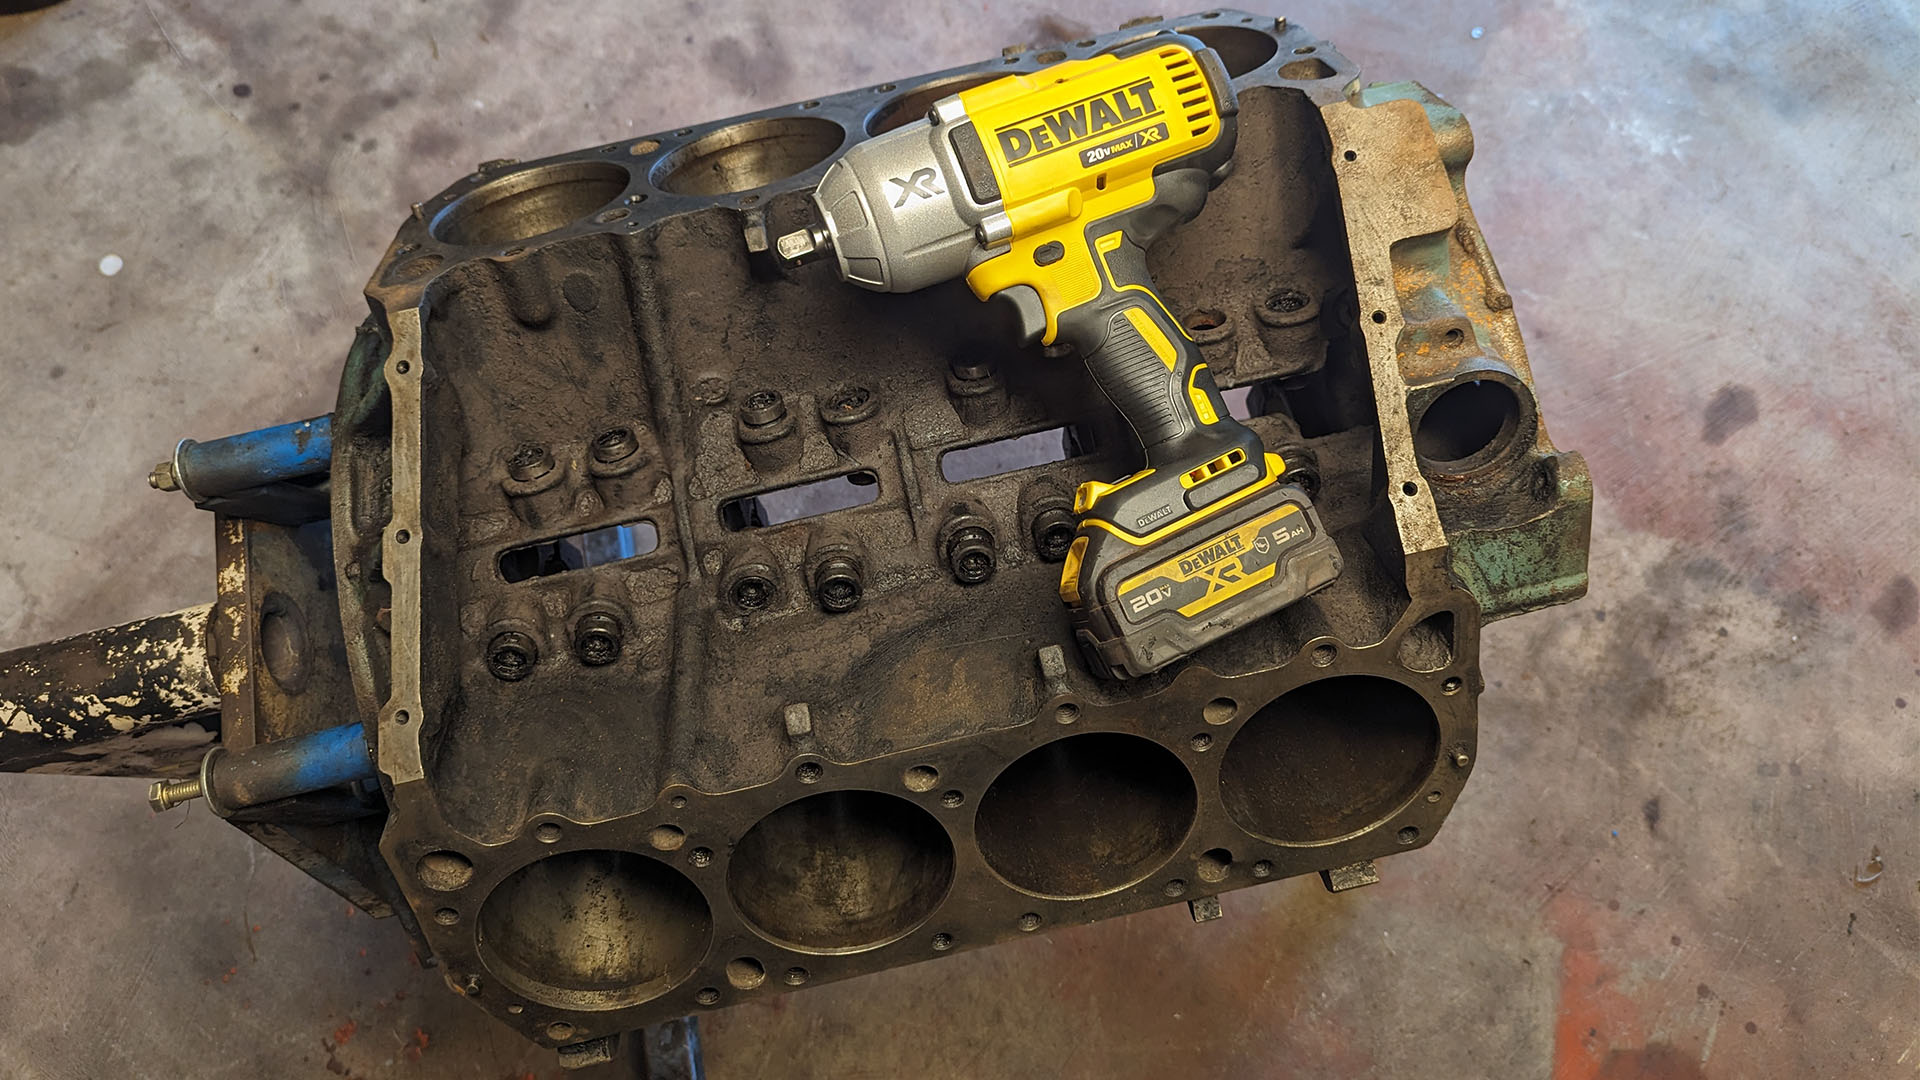 DEWALT Introduces Industry's Highest Rated Max Torque Cordless 1/2 in.  Impact Wrench